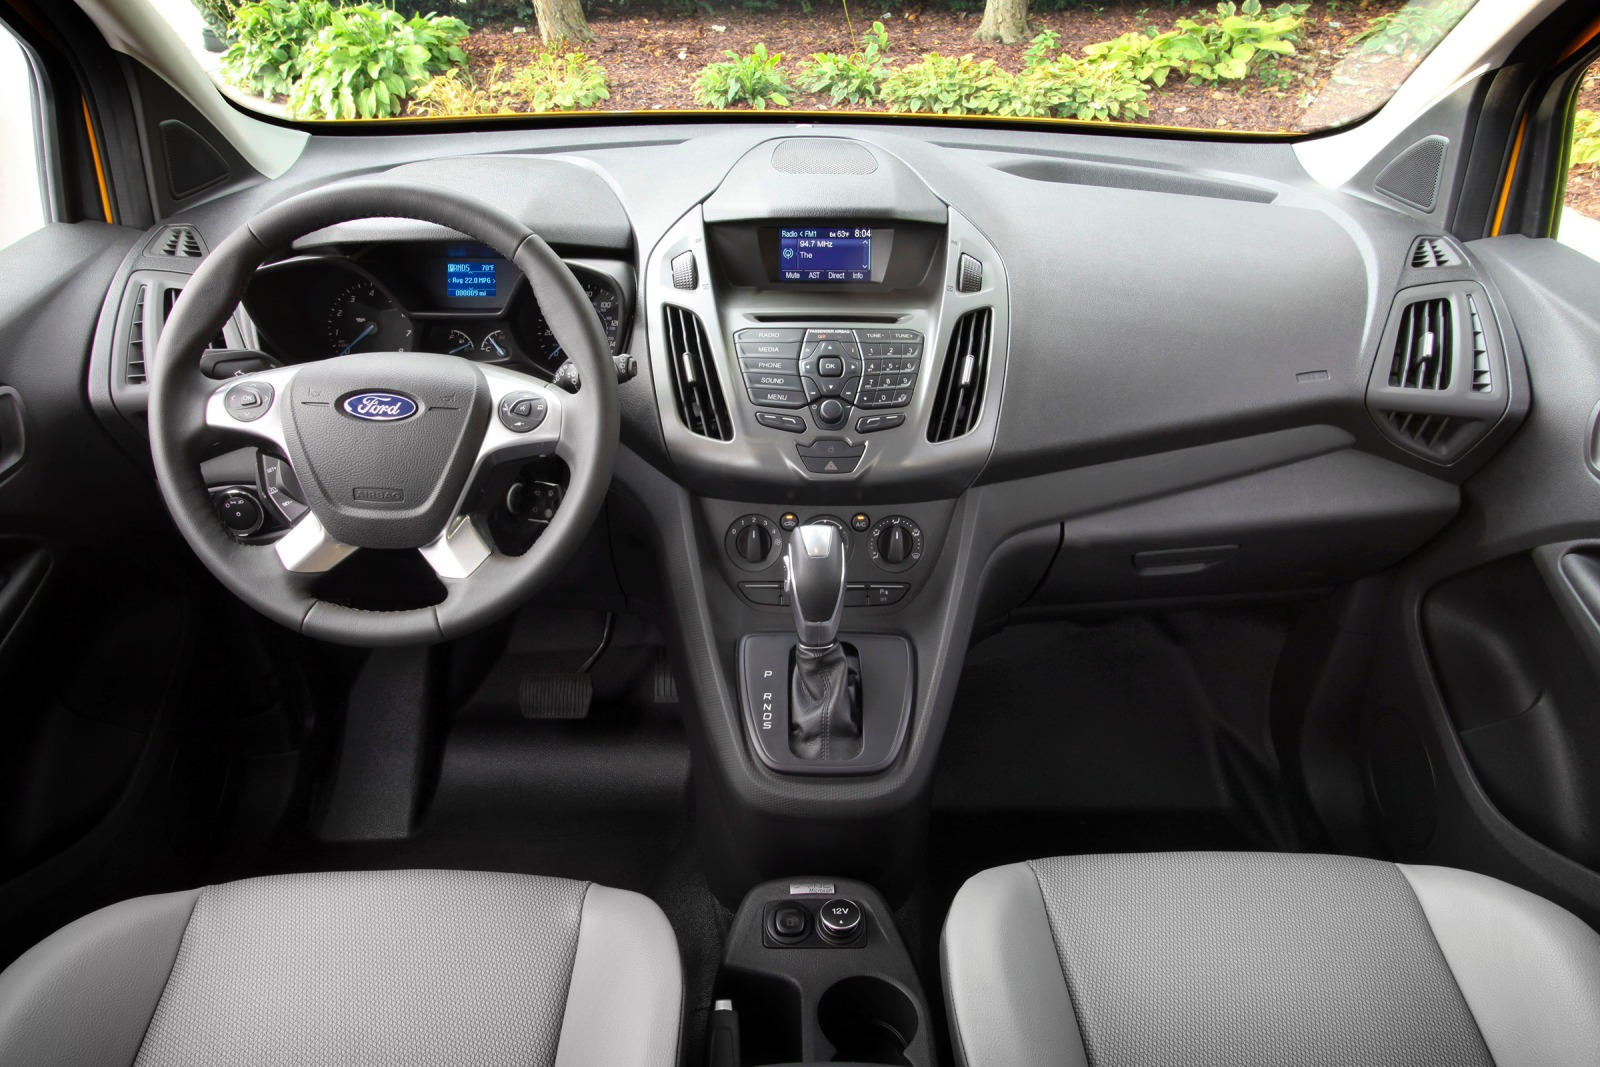 2016 Ford Transit Connect Cargo Van Dashboard